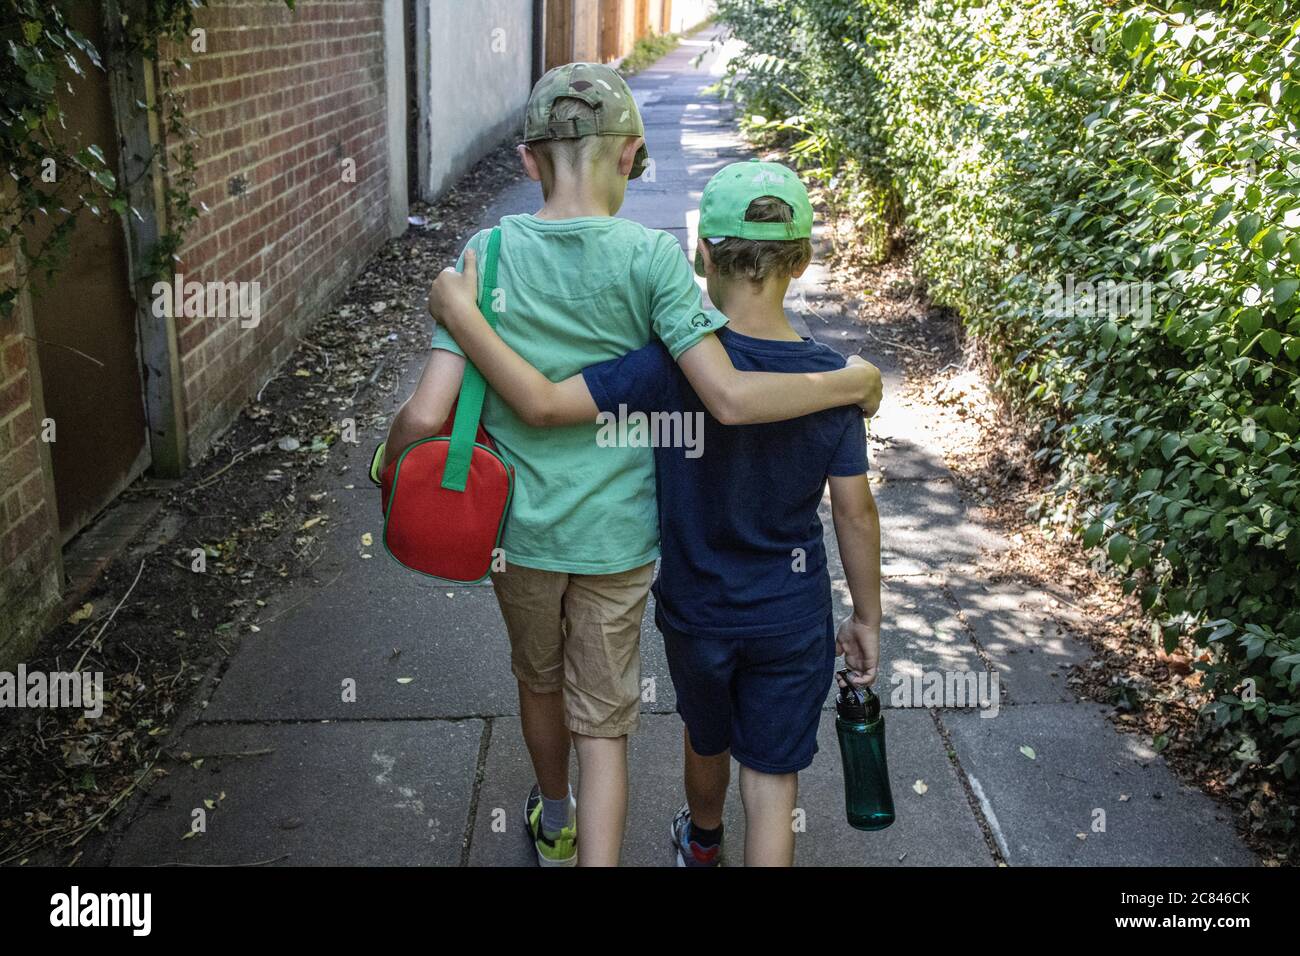 Brotherly love, Two young brothers walking together, arms around each others shoulders, London, England, United Kingdom Stock Photo